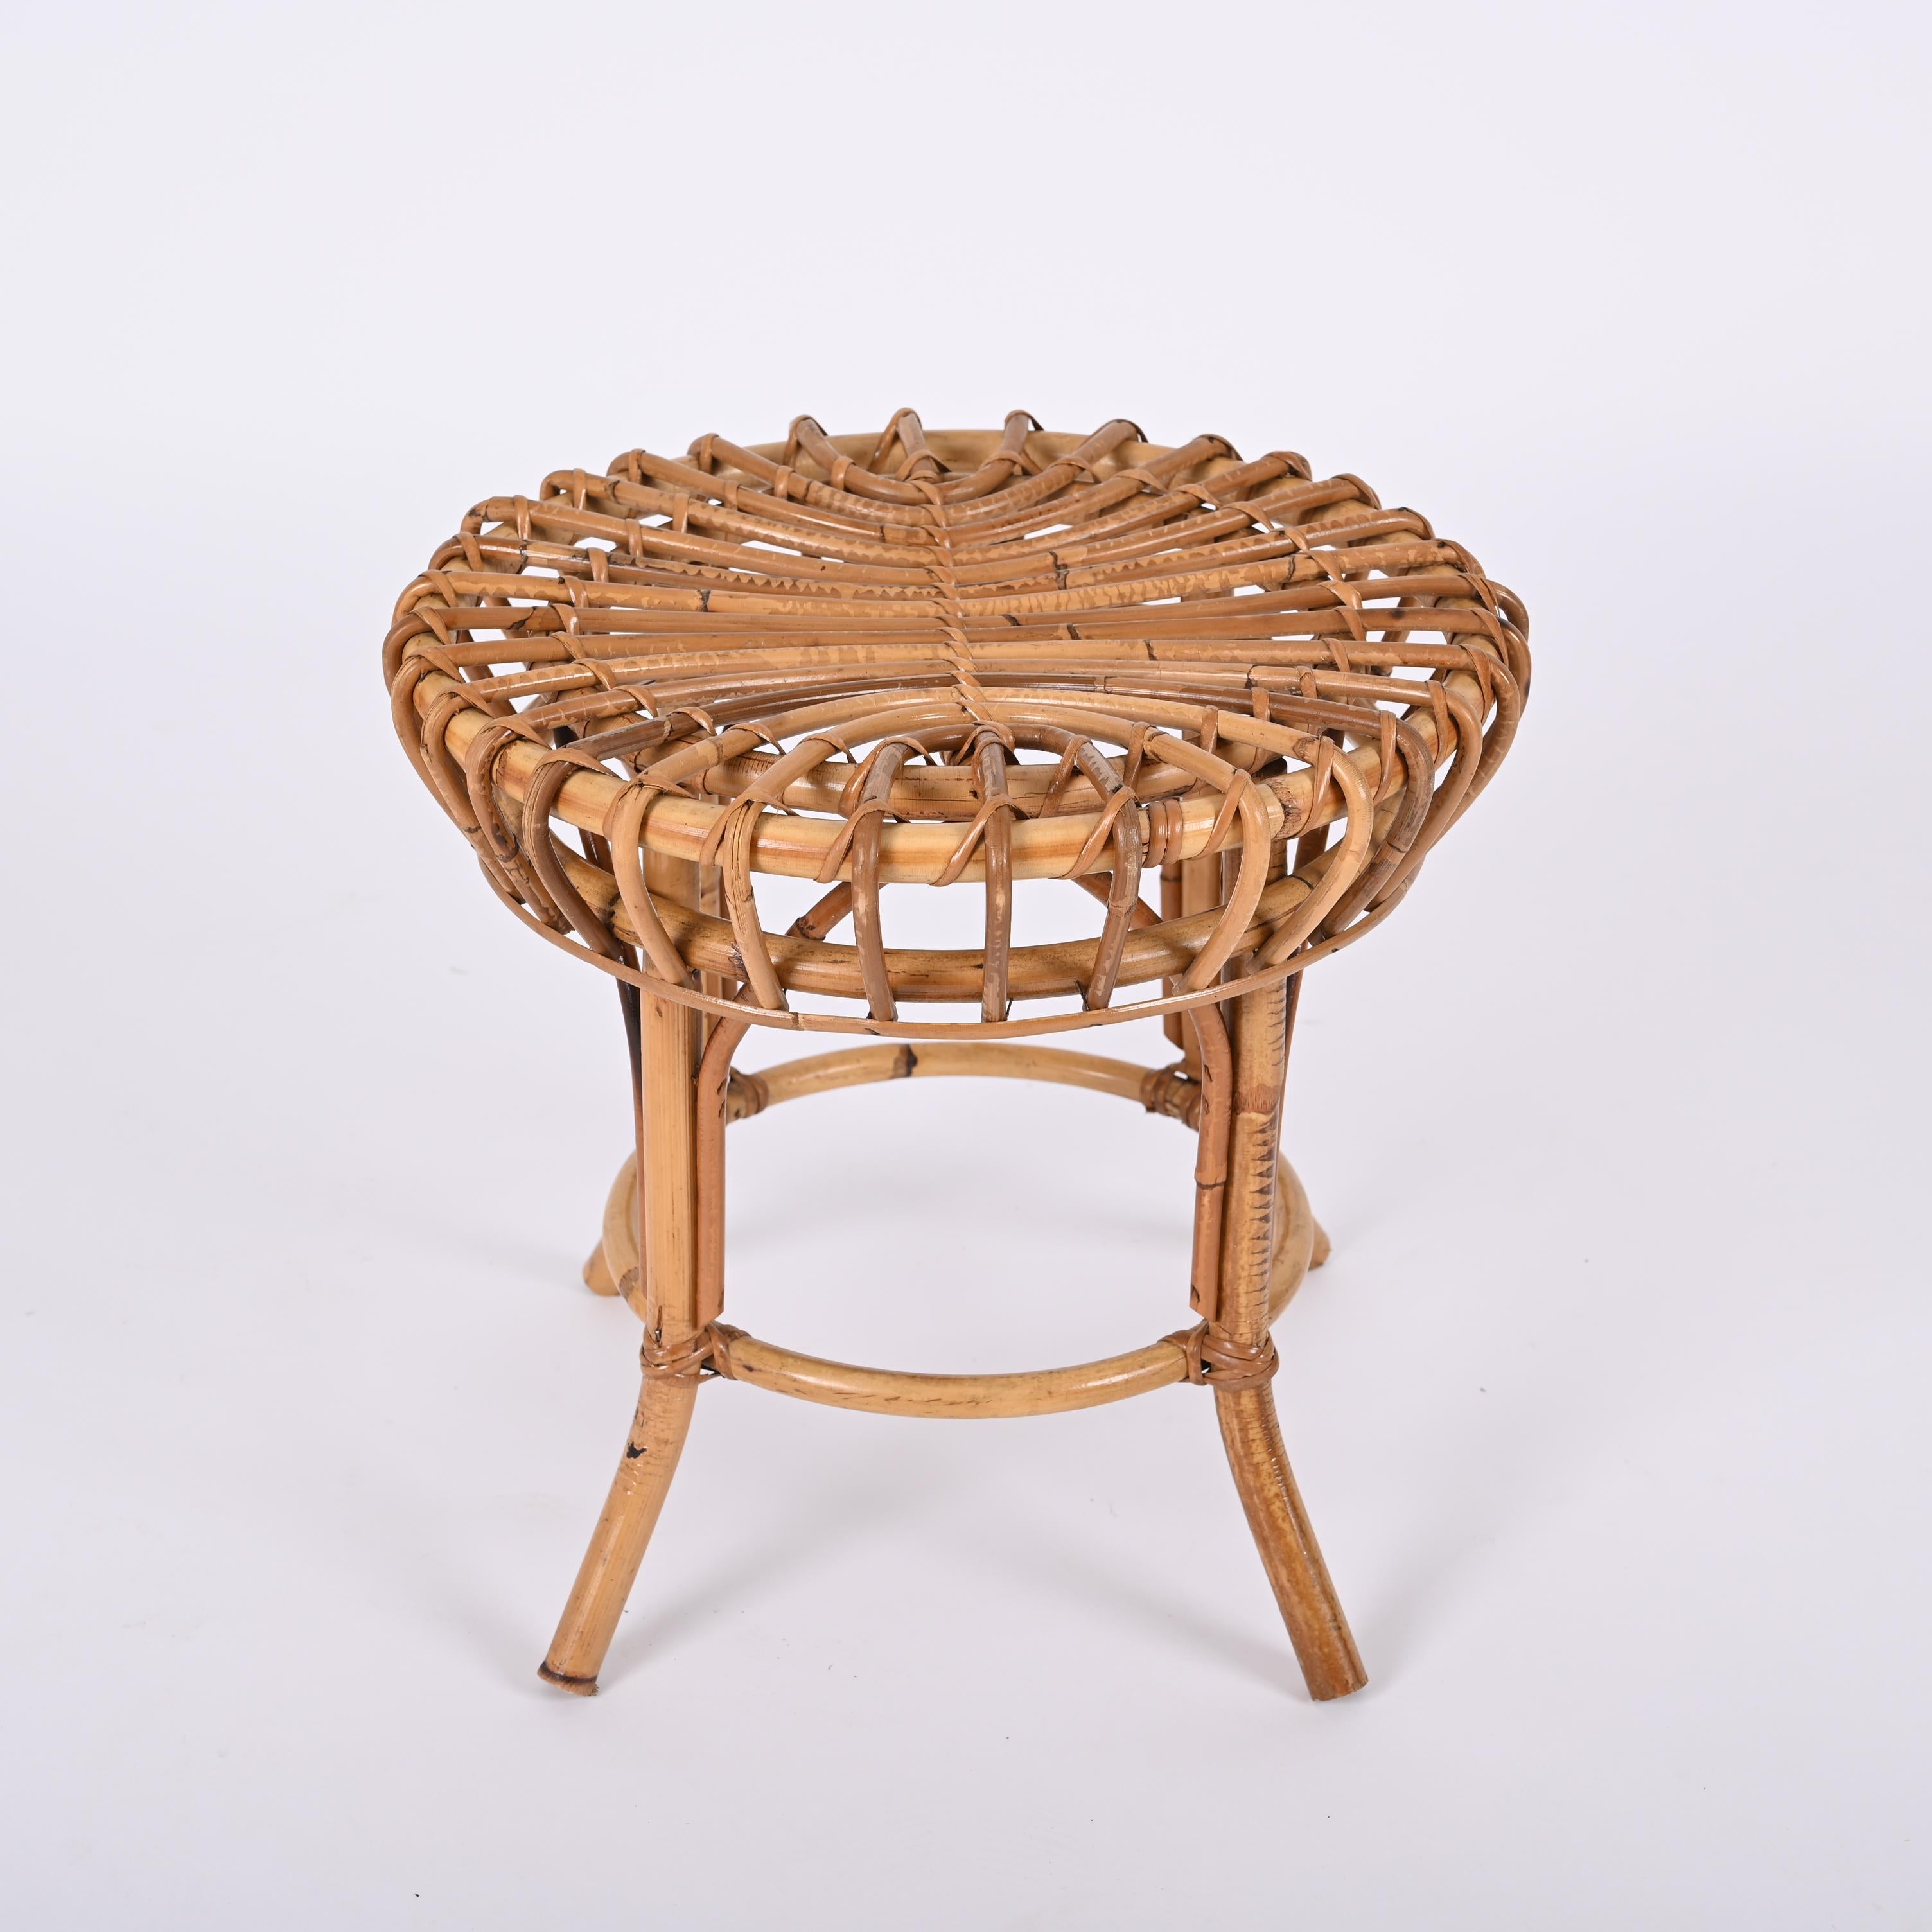 Franco Albini Midcentury Rattan and Bamboo Round Ottoman Stool, Italy 1960s For Sale 7